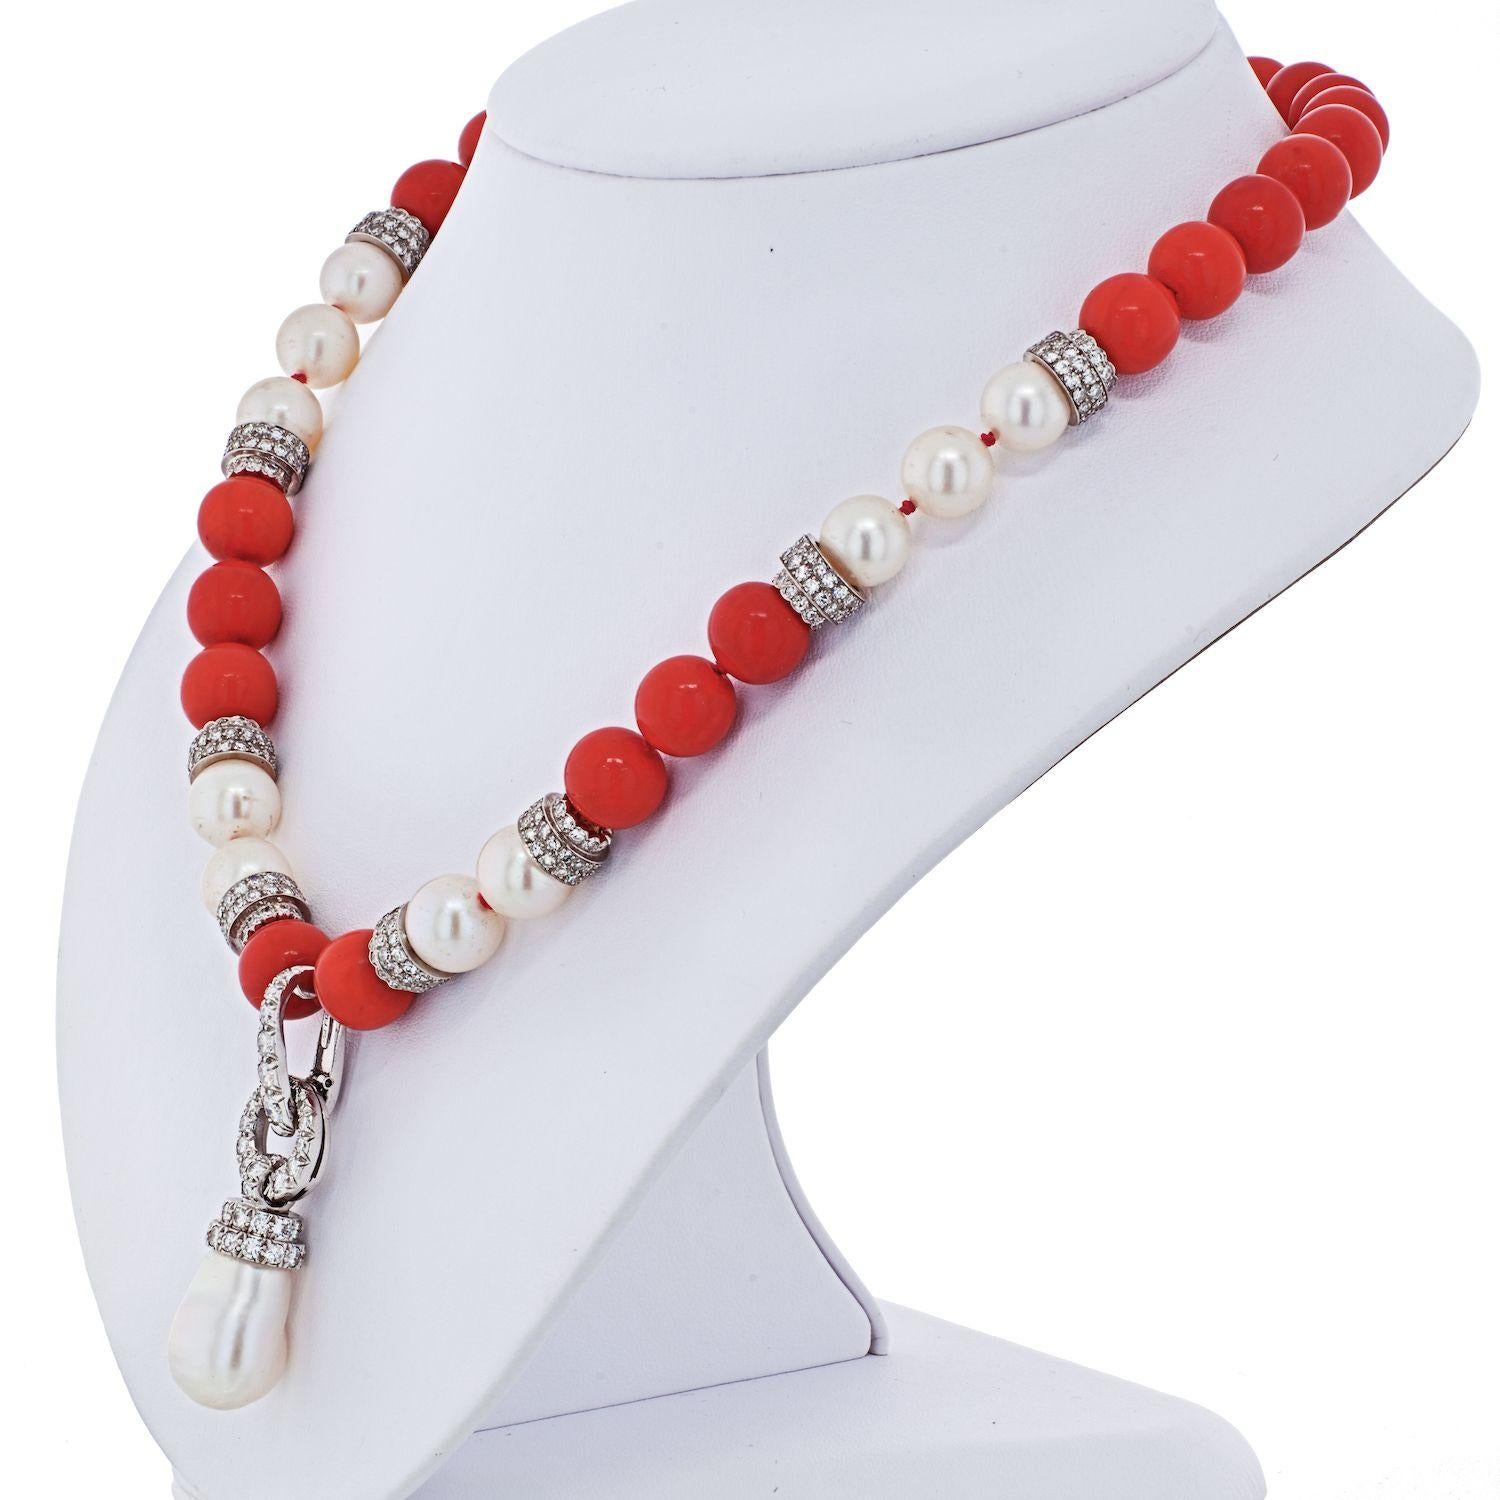 Experience the exceptional allure of the David Webb Coral and Pearl Diamond Bead Necklace, a unique and captivating piece that combines coral, pearls, and diamonds in an exquisite design.

**Key Features:**

1. **Material:**
   - Crafted in a